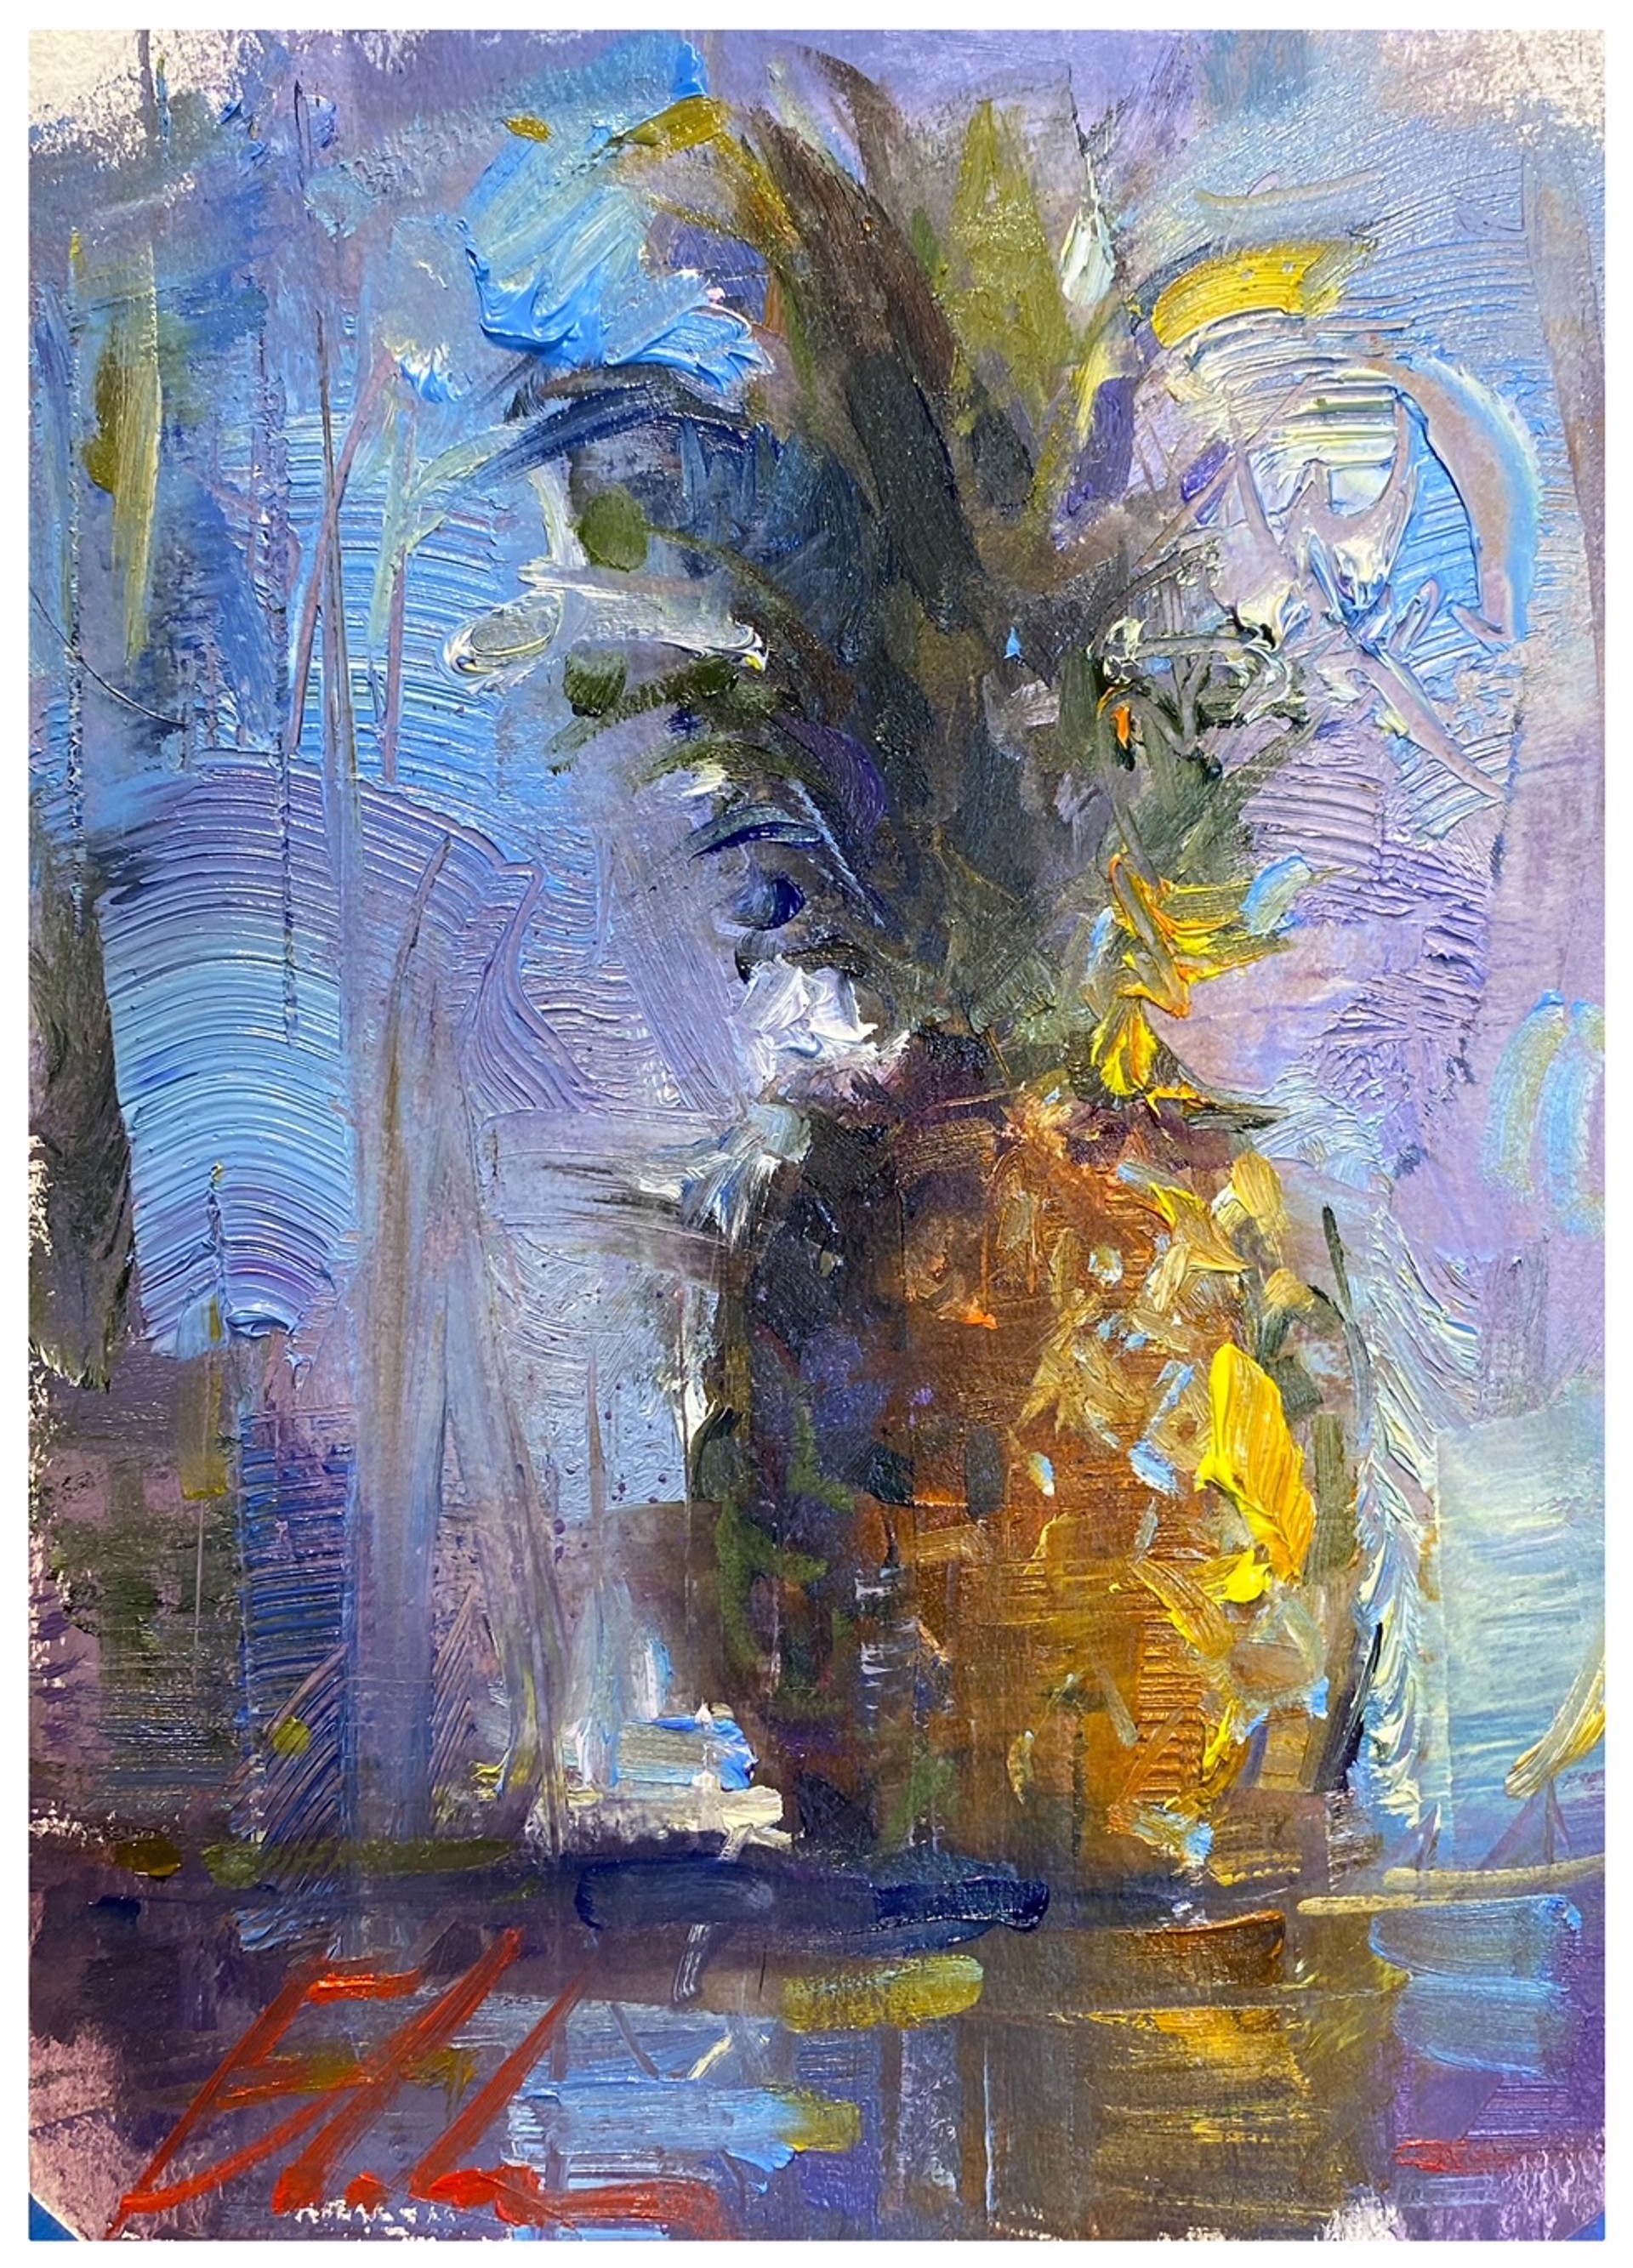 Untitled (Pineapple) by Michael Flohr